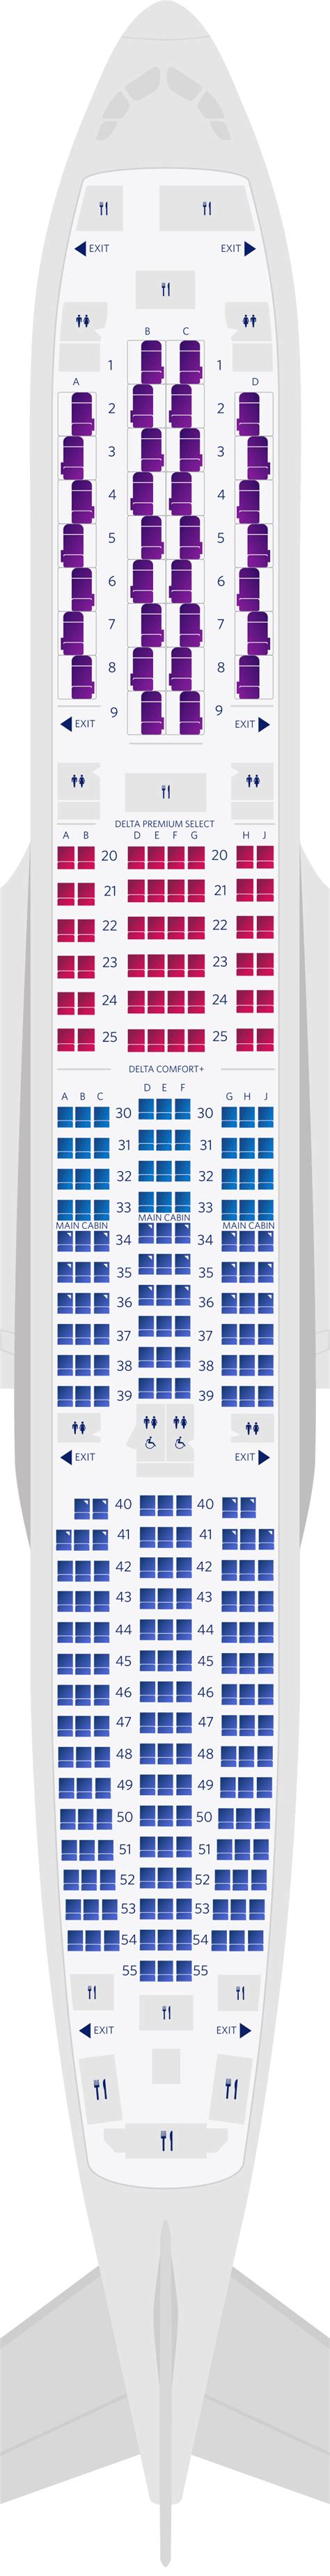 Airbus A350 900 Seat Map Delta Image To U